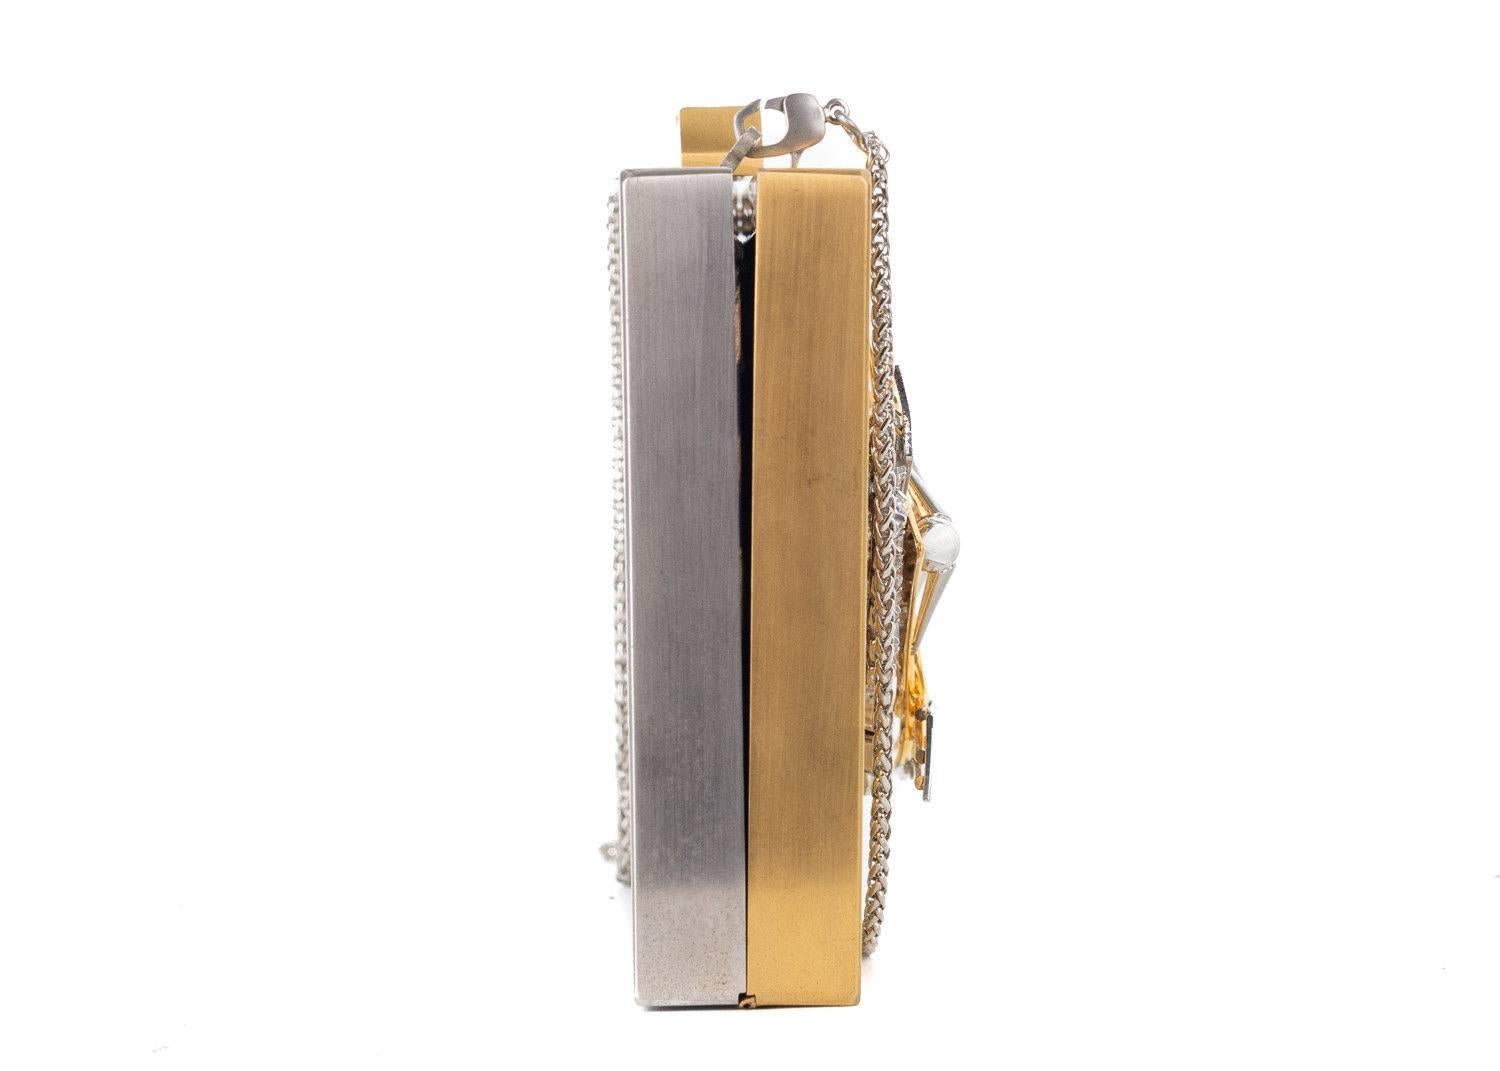 Roberto Cavalli gold metal clutch. This clutch can be worn on the shoulder with its detachable shoulder strap. Emebllished with crsytal detailing, this piece is eye catching and sure to stun in the crowd

 

Brass
Gold Metallic Front and Silver